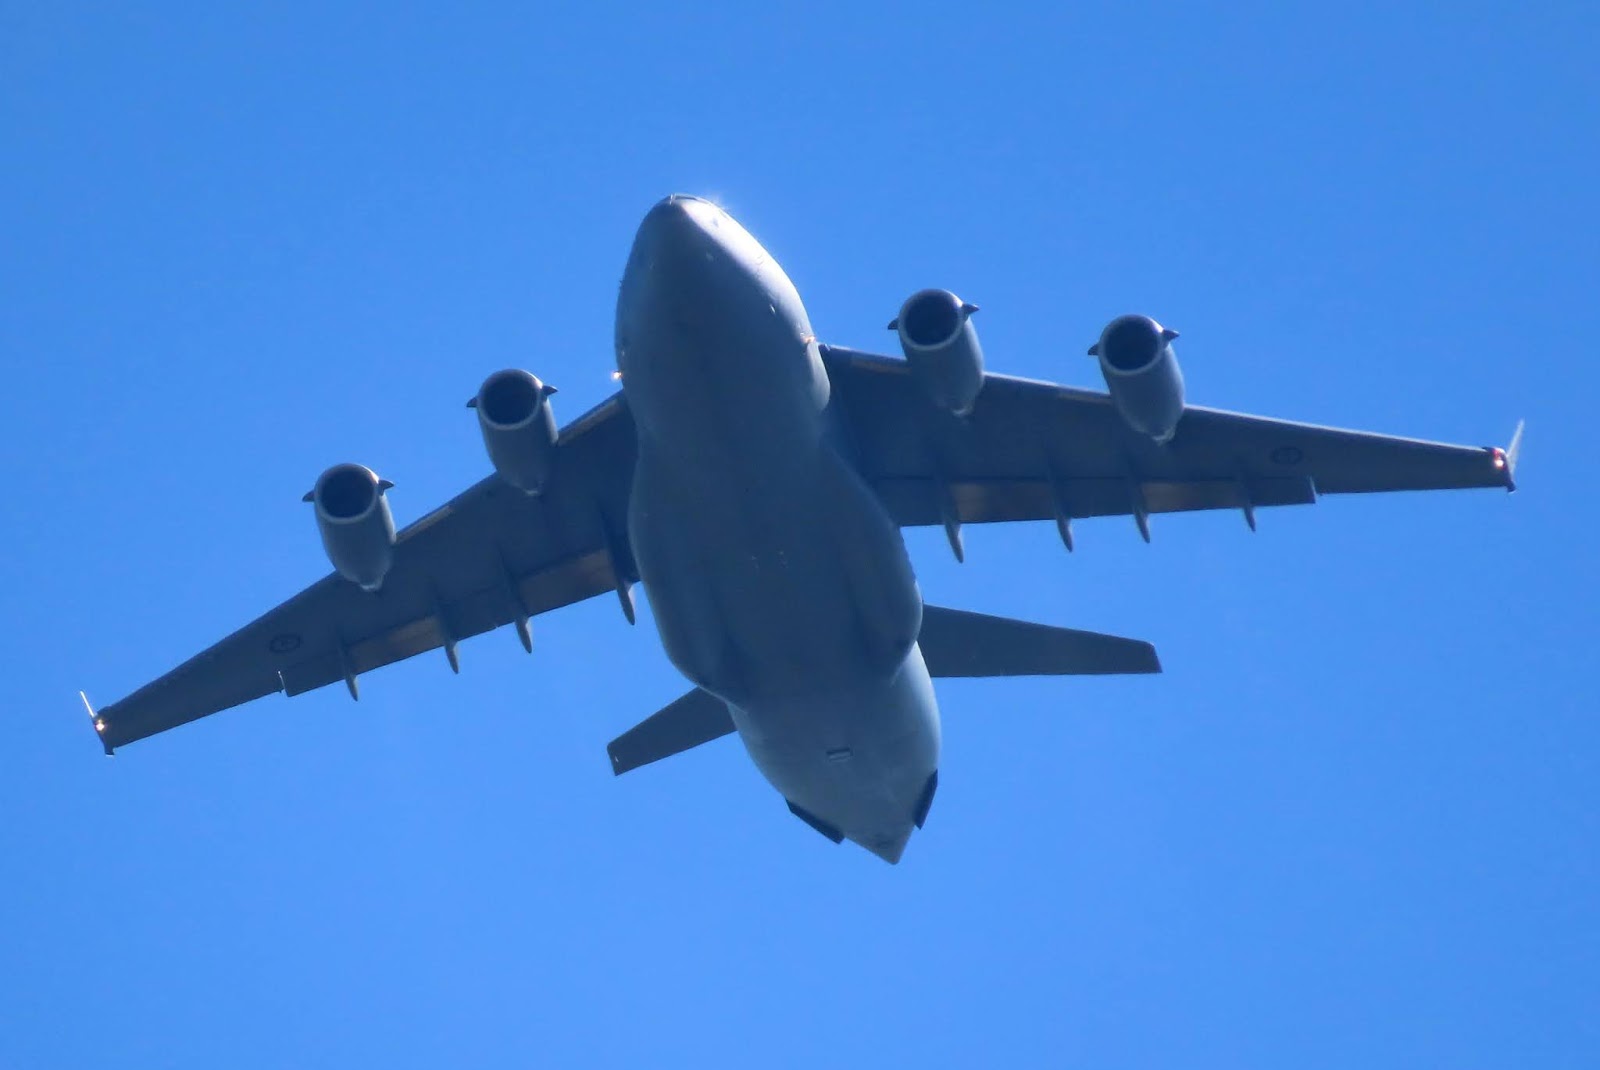 Central Queensland Plane Spotting: Australian Air Force (RAAF) Boeing C-17A Globemaster III A41-213 "Stallion 17” Missed Approach at Rockhampton Airport